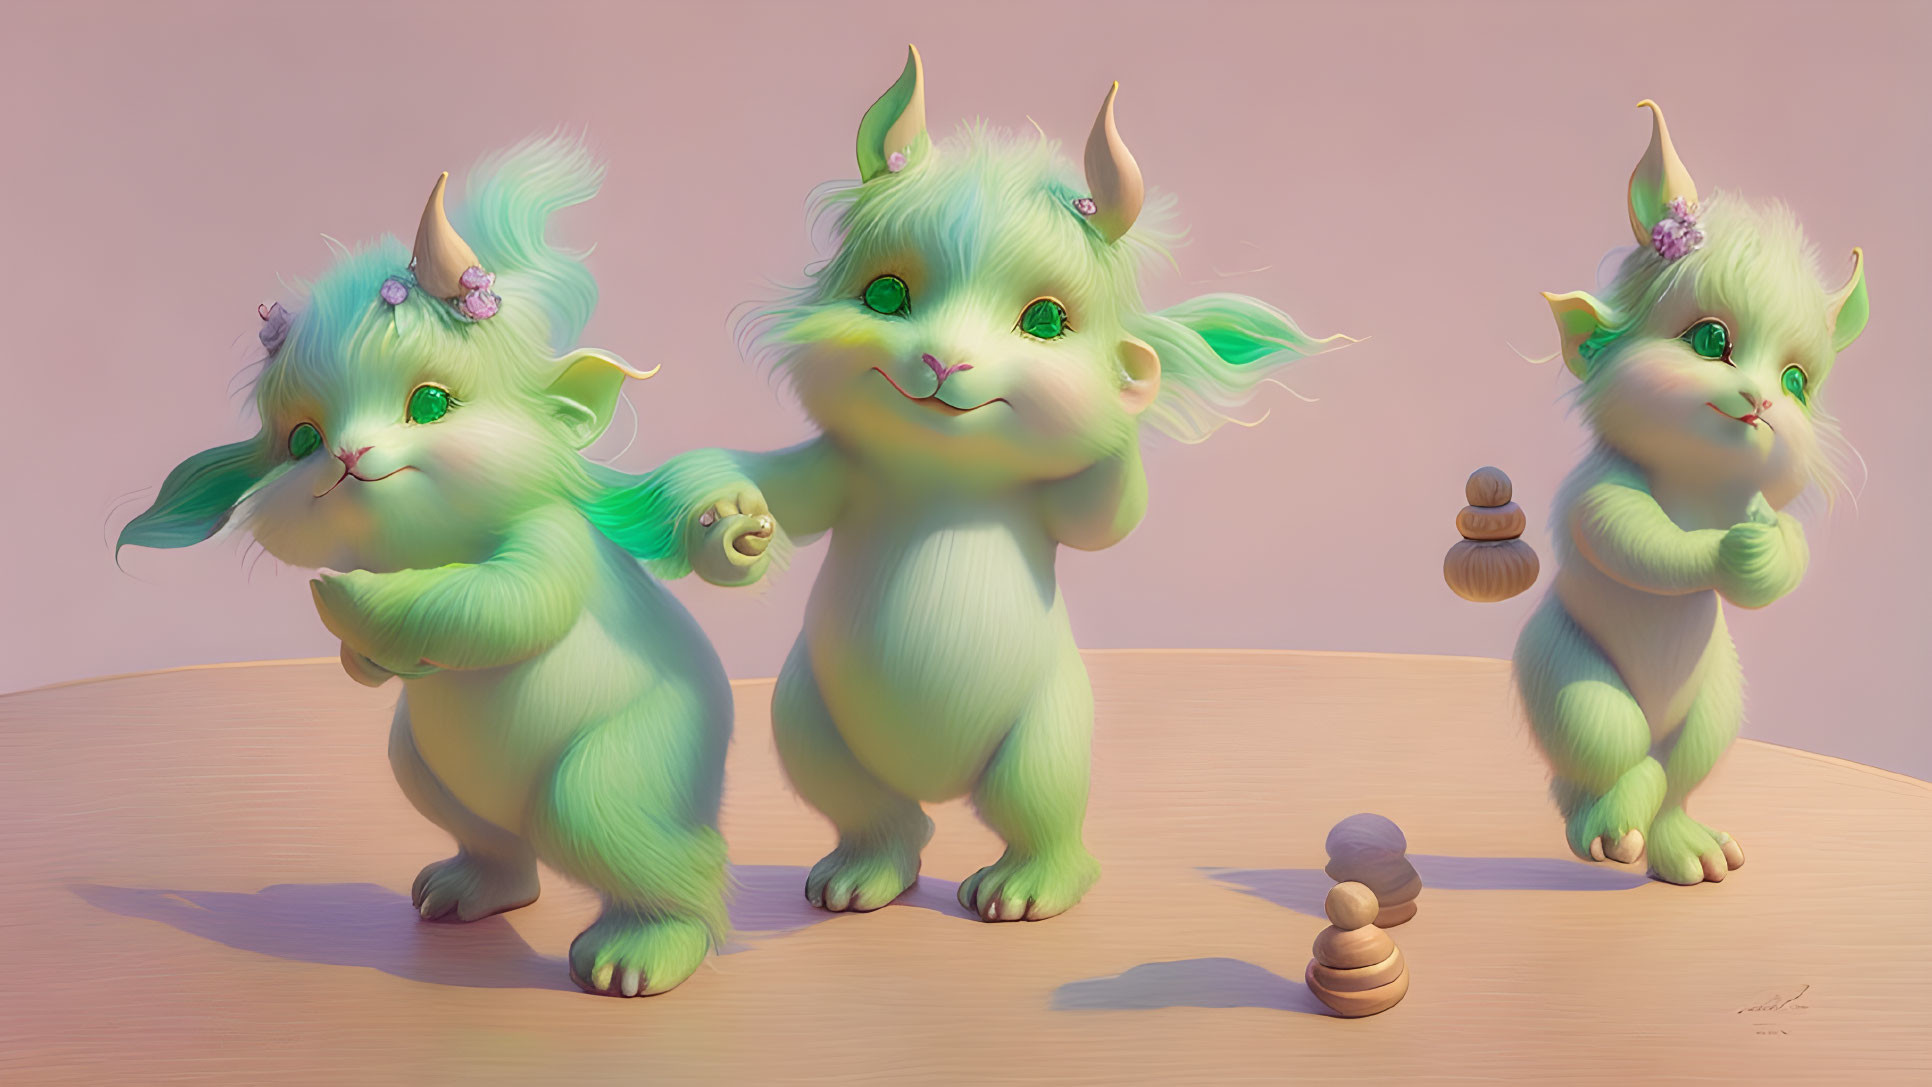 Three adorable green creatures with big ears and whiskers holding objects